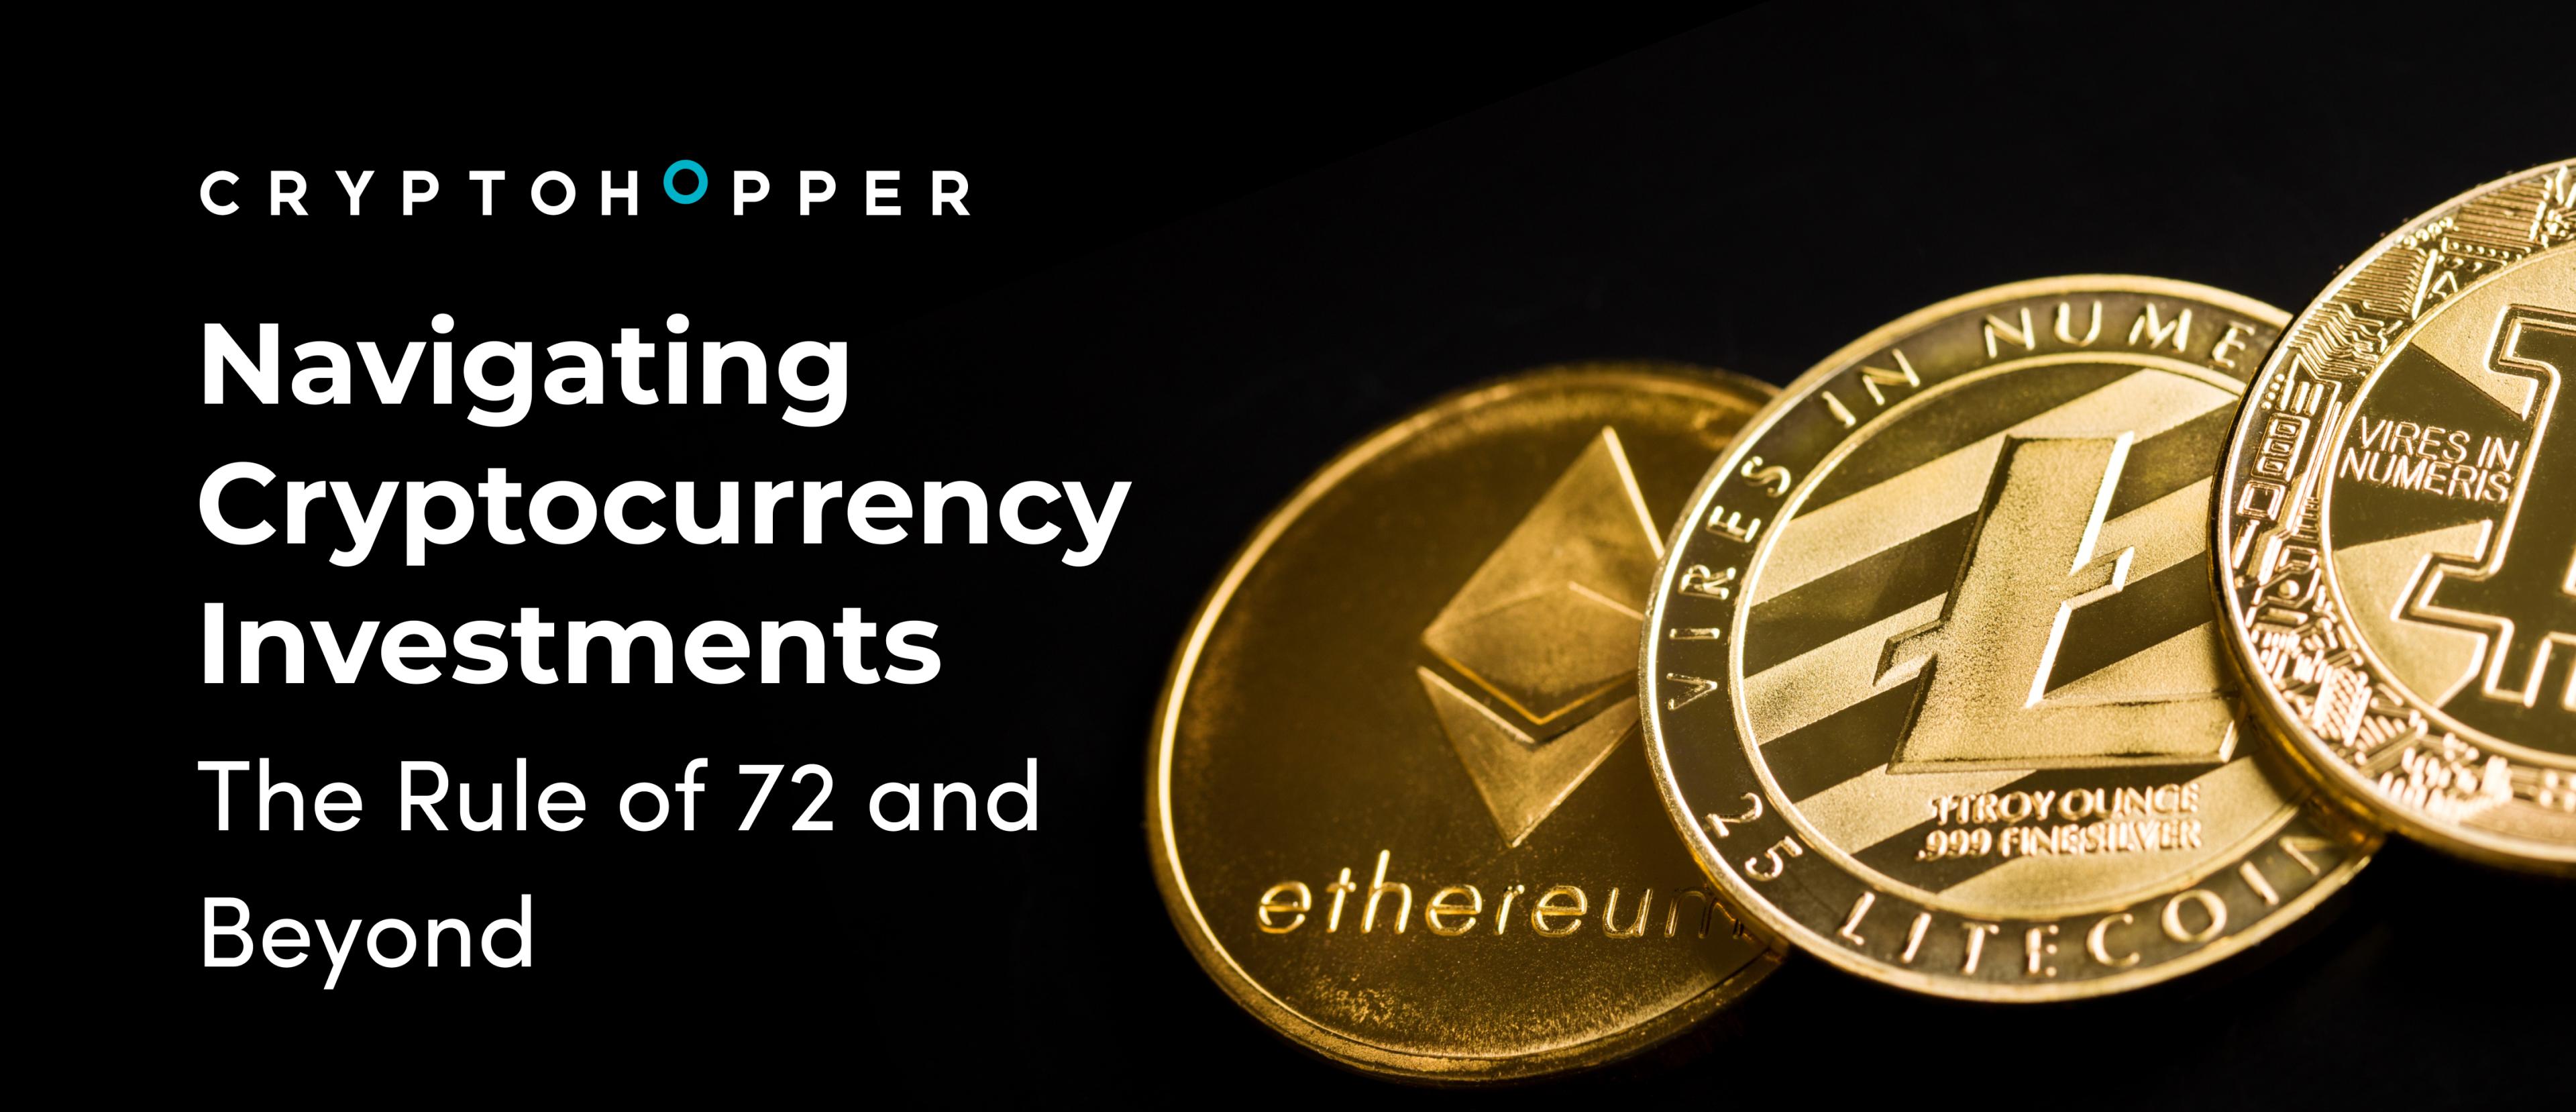 Navigating Cryptocurrency Investments The Rule of 72 and Beyond